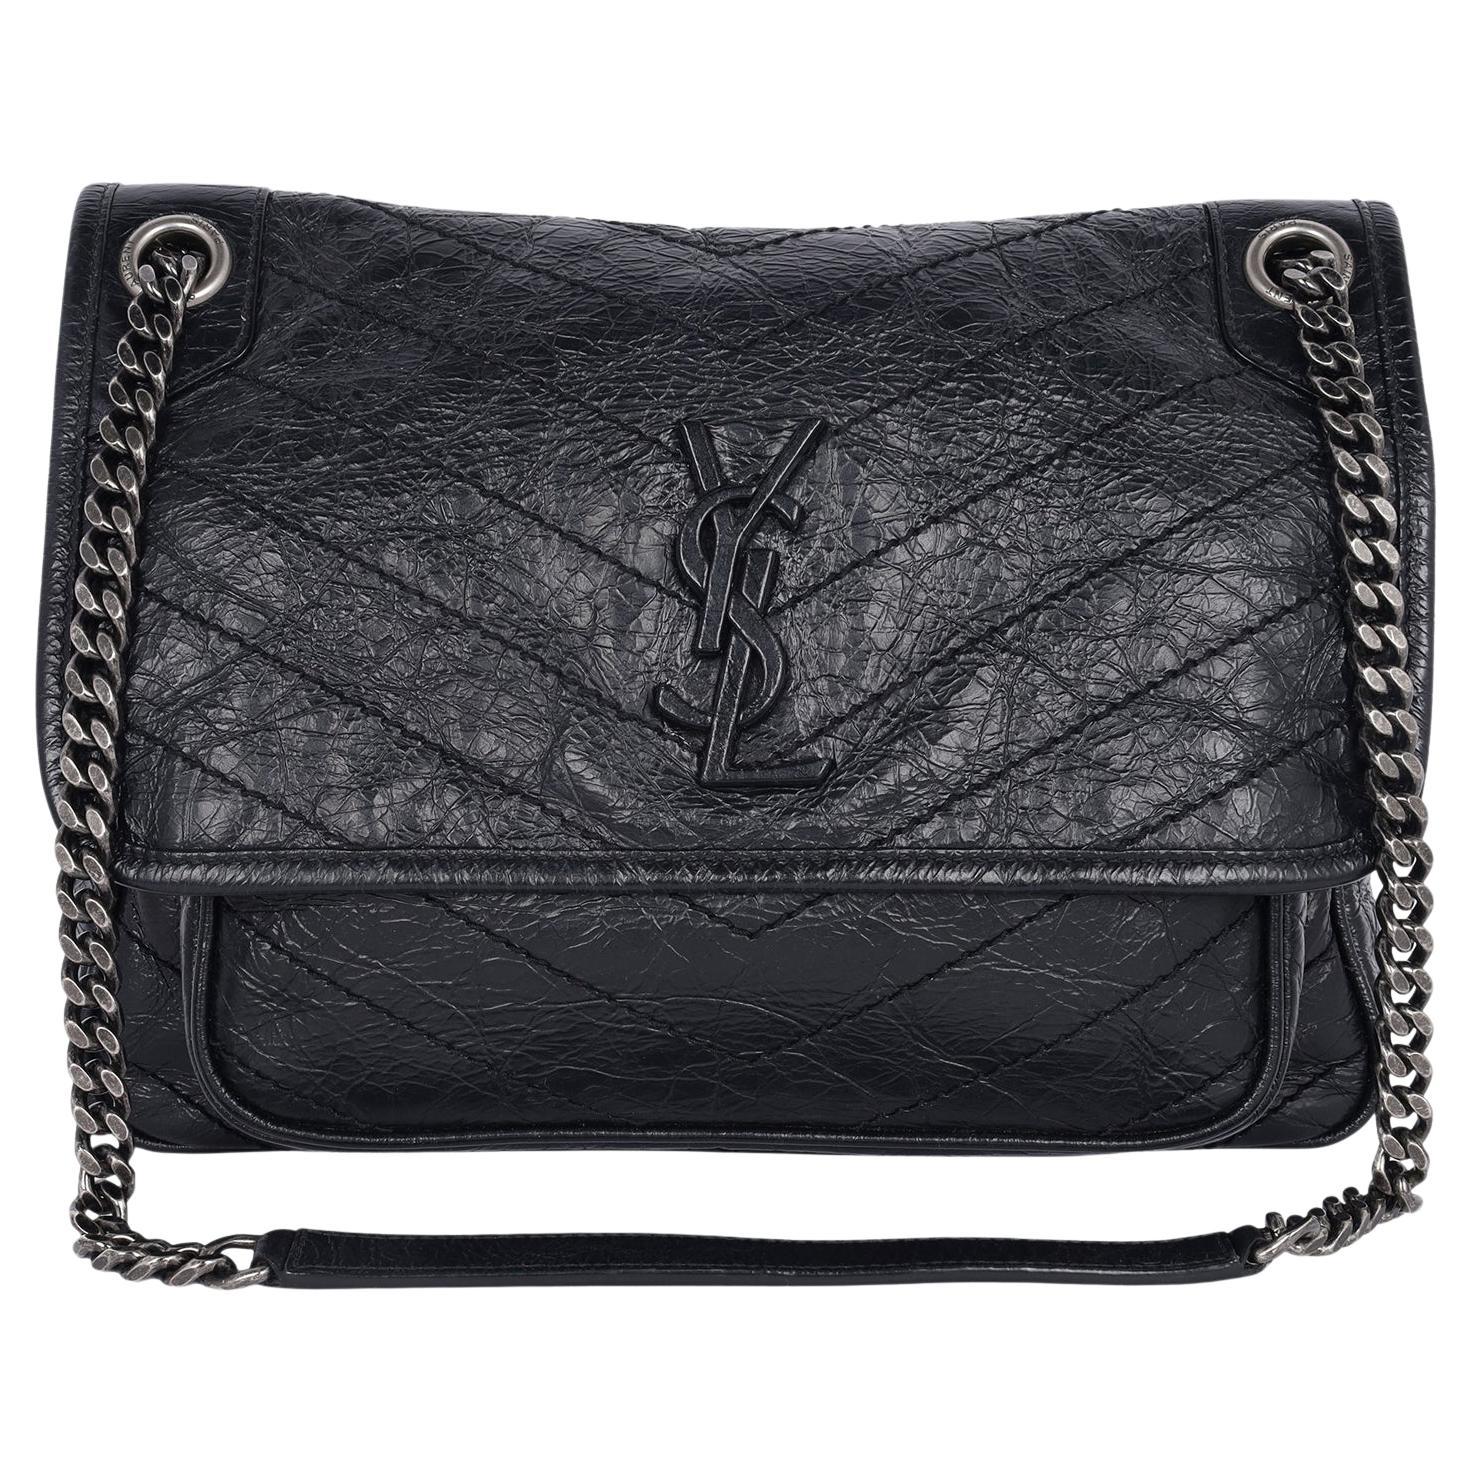 Is the YSL Loulou bag a classic?